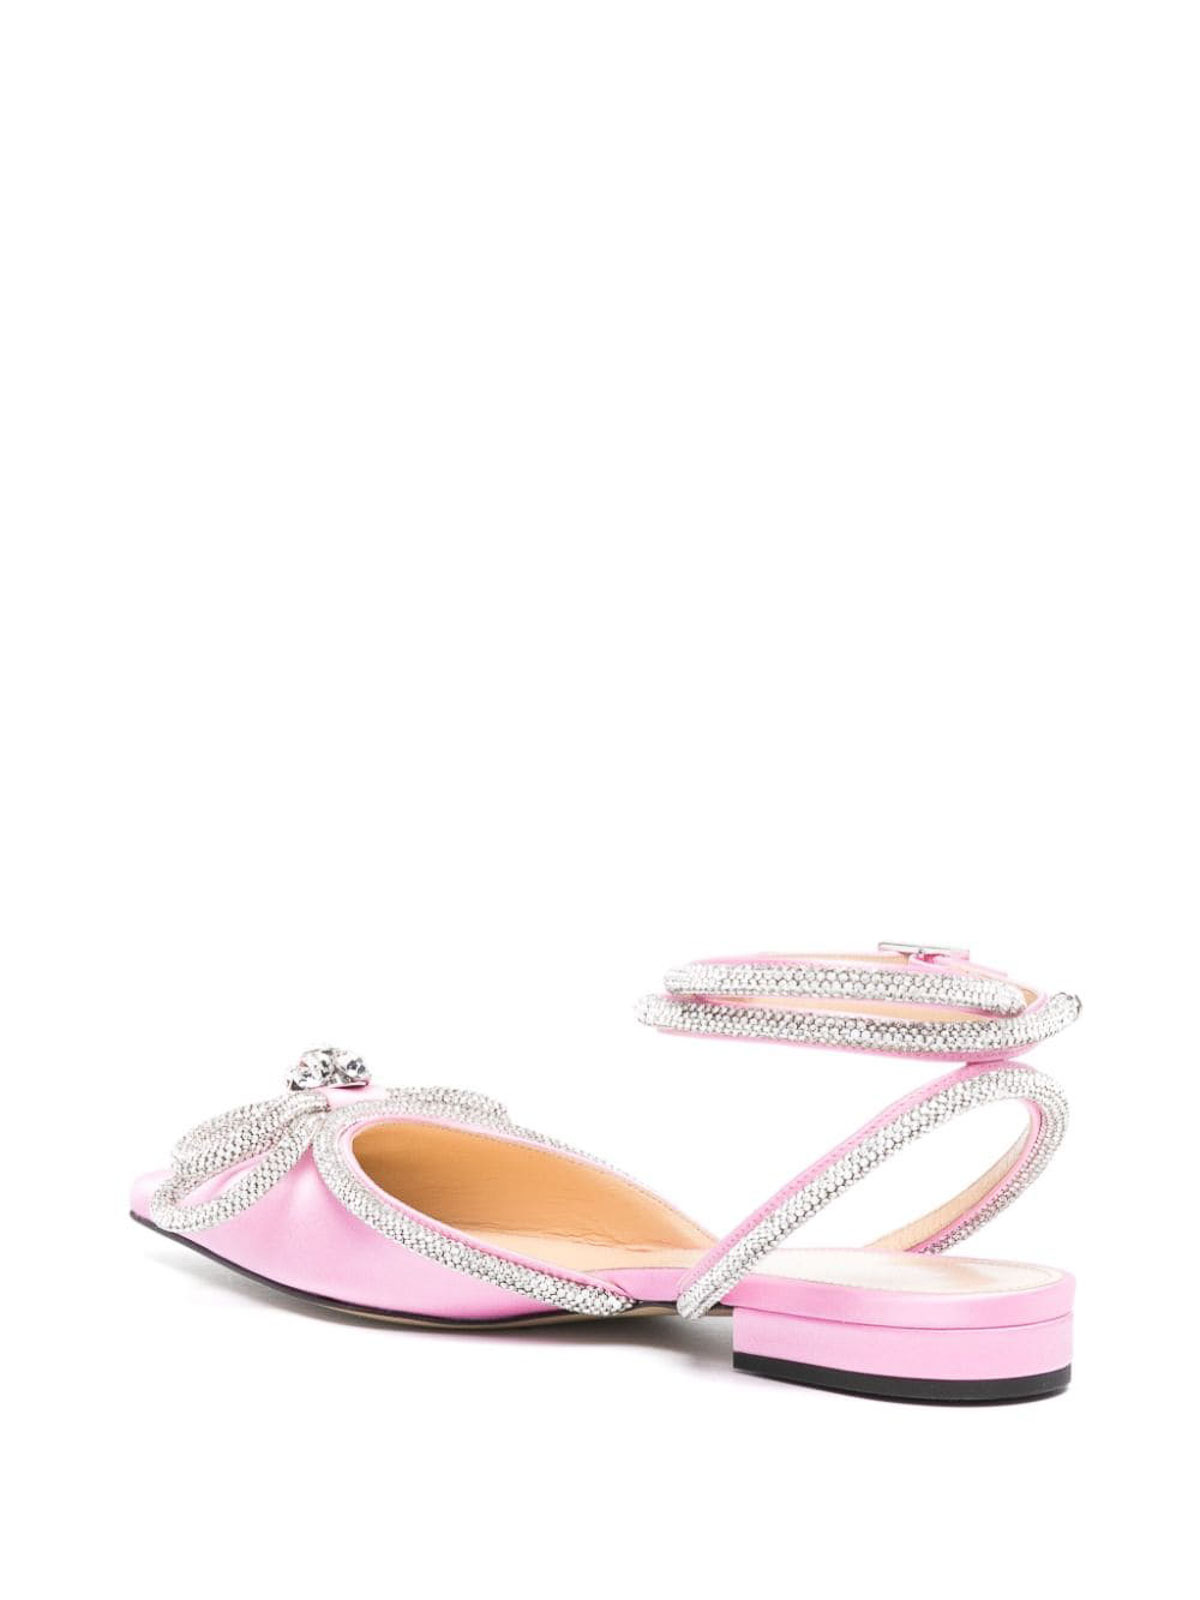 Shop Mach & Mach Double Bow Satin Slingback Ballet Flats In Color Carne Y Neutral